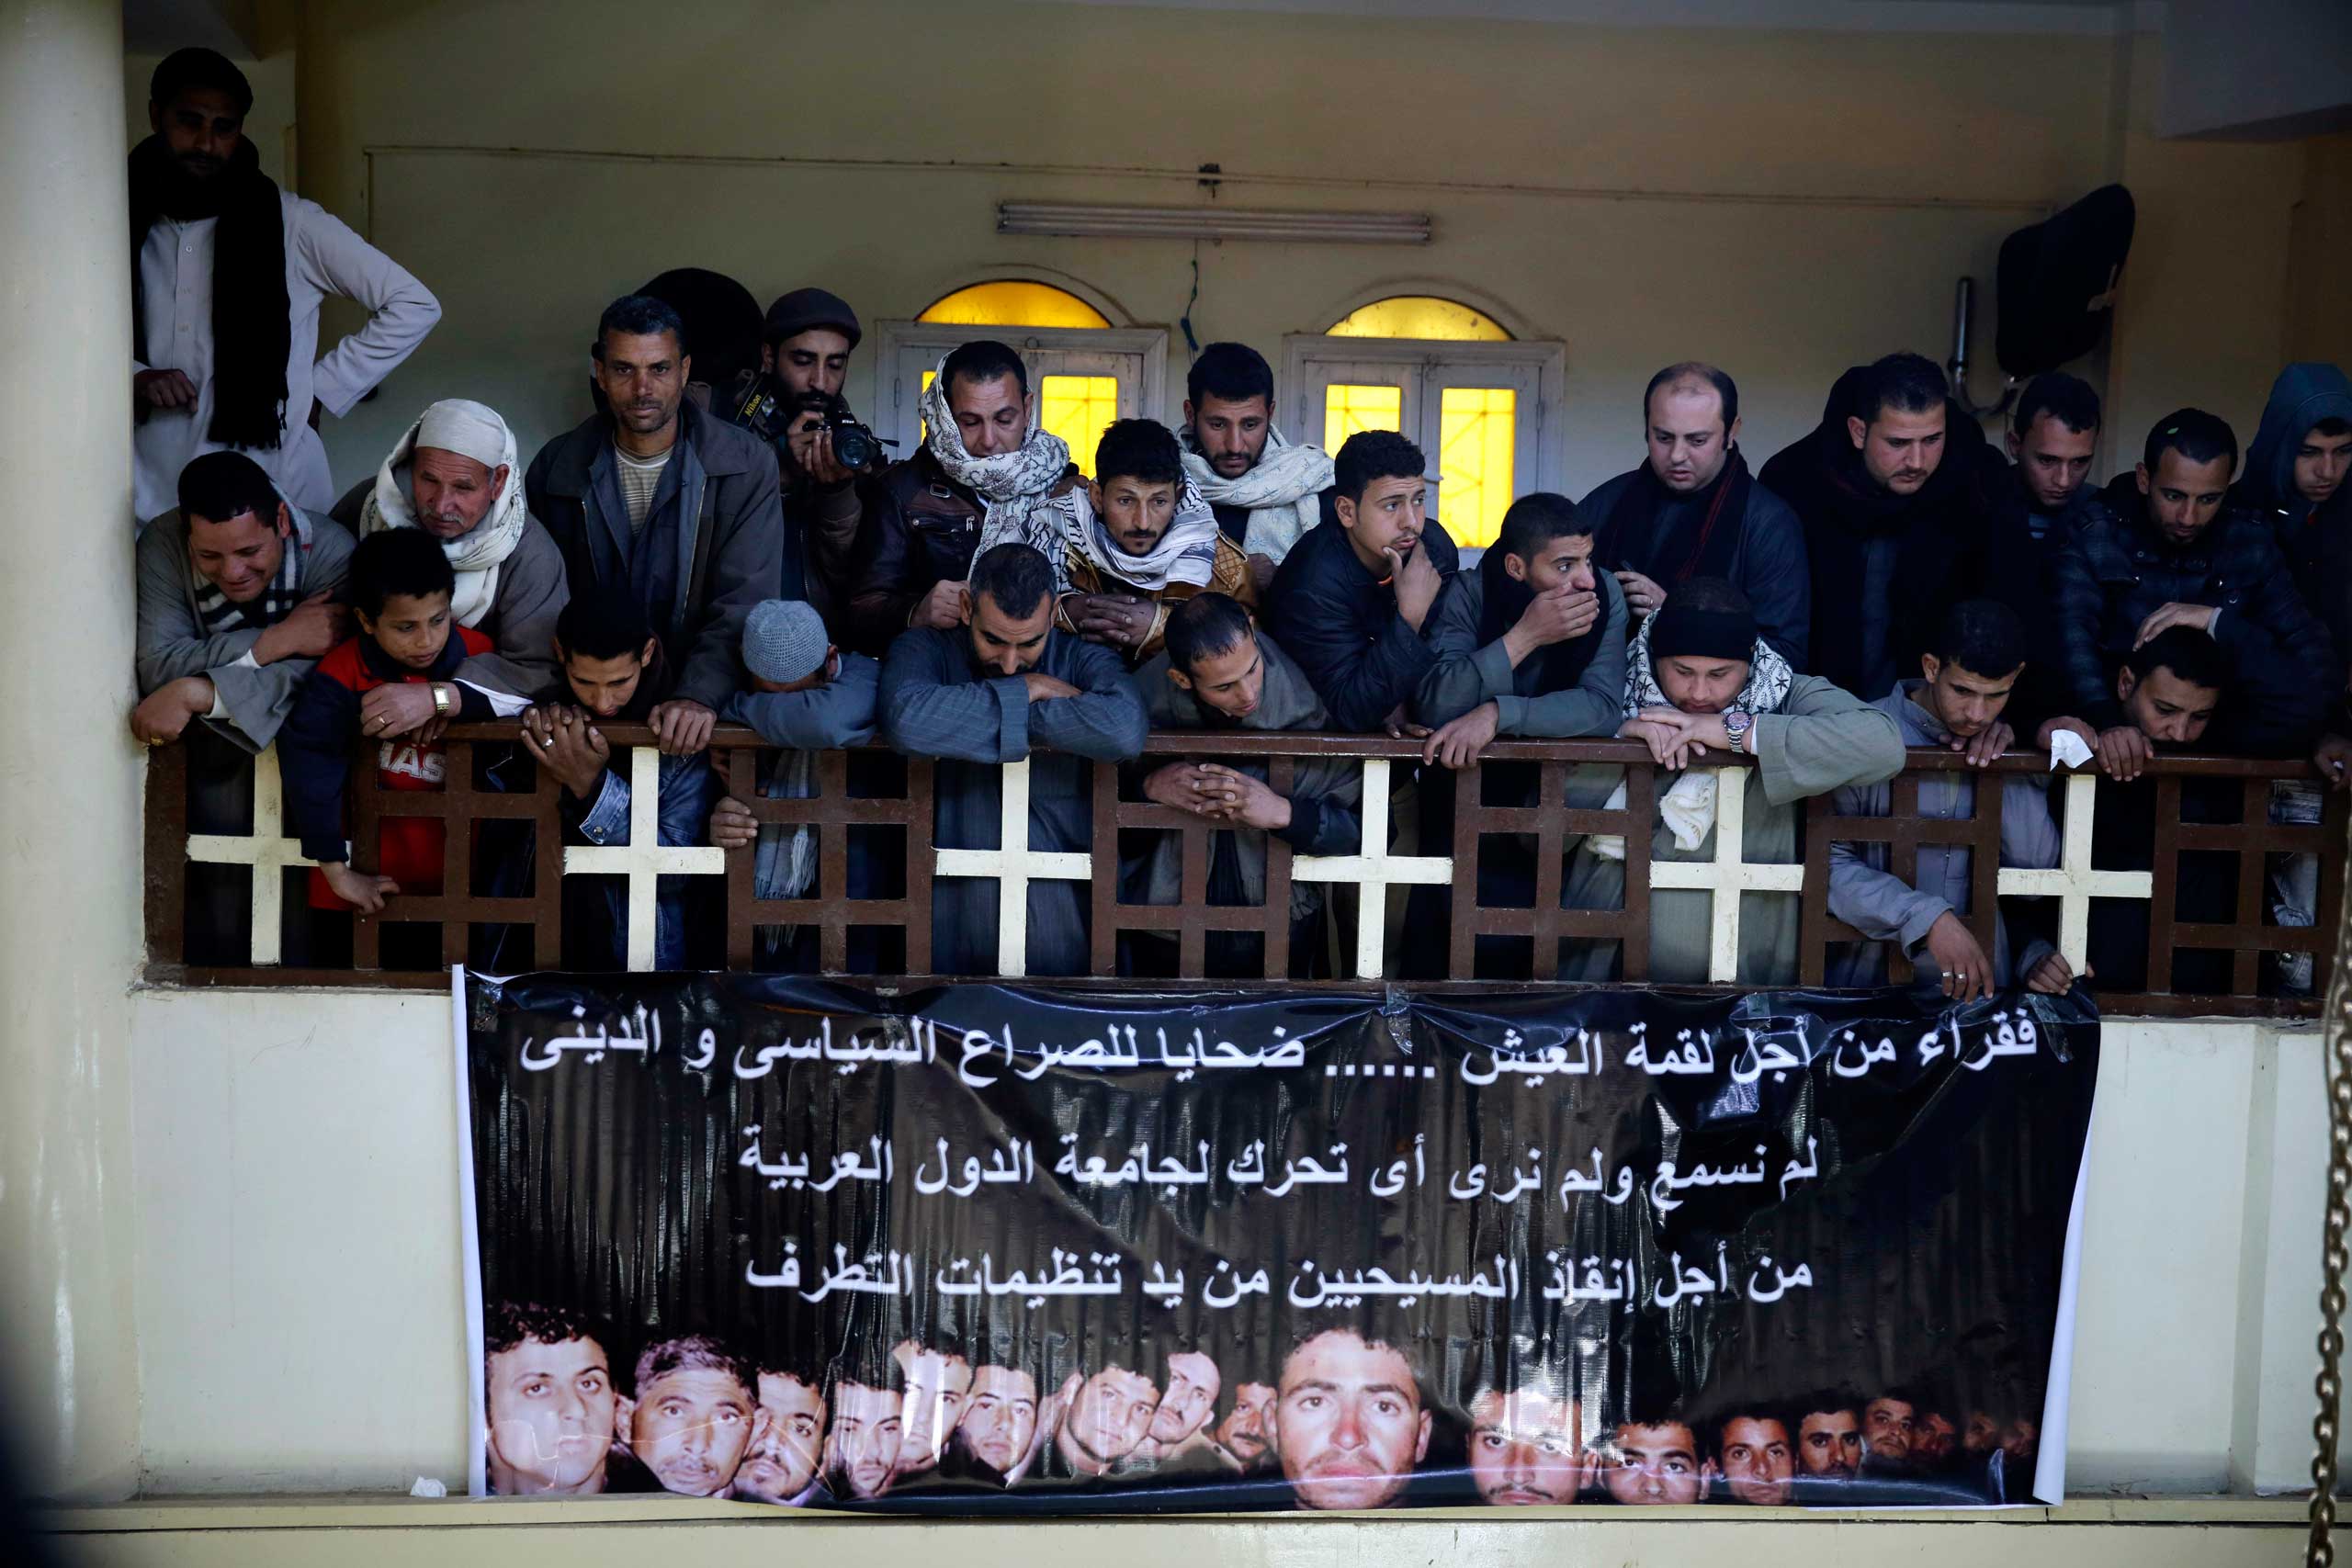 Christians being beheaded in syria